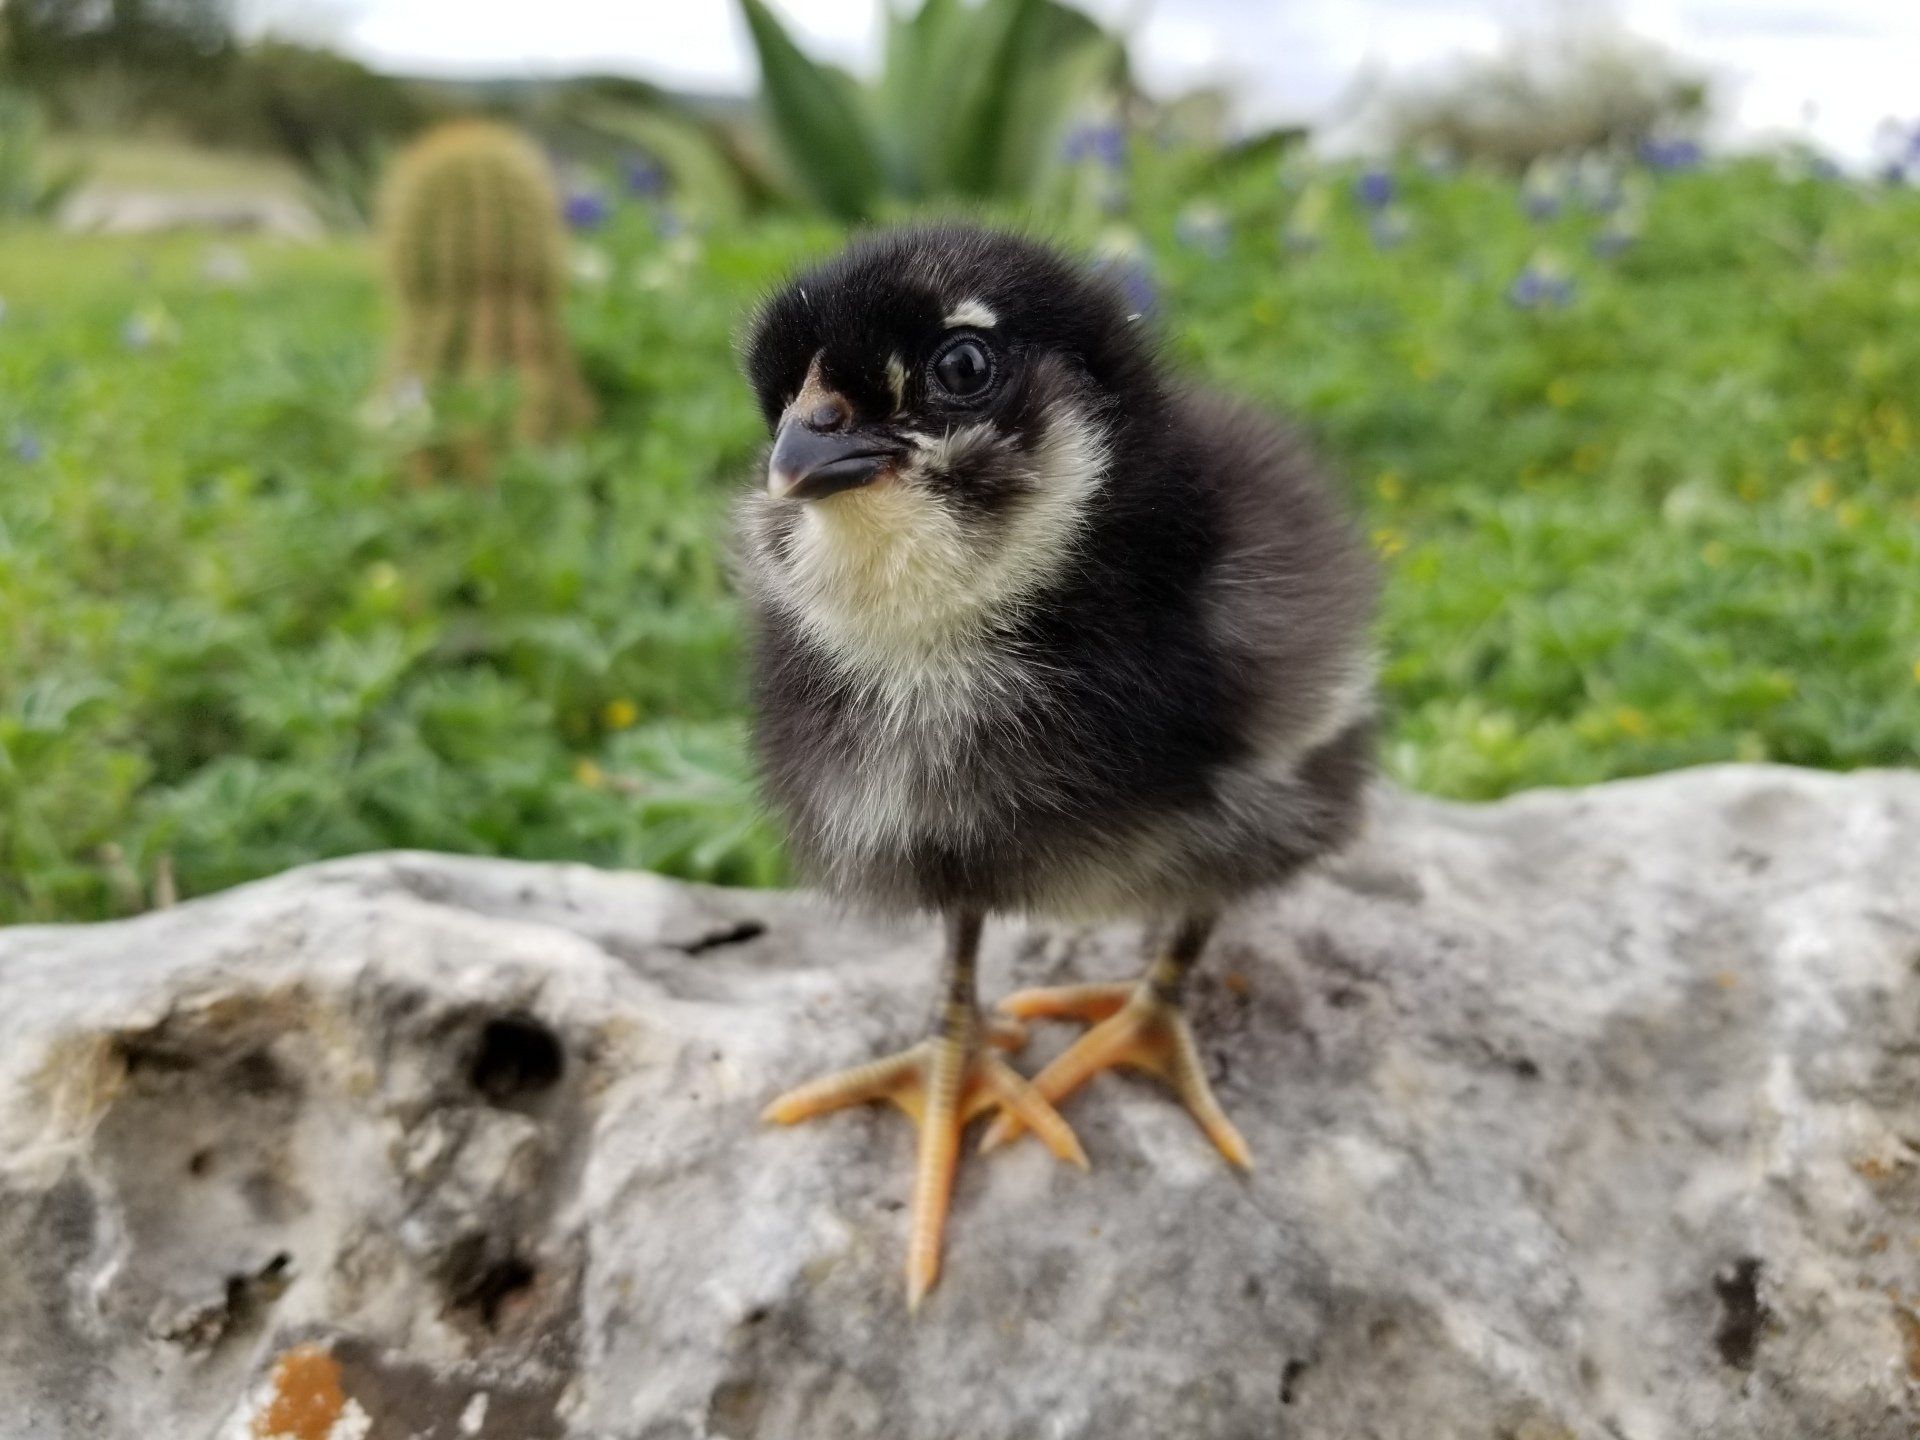 Black and white baby chick